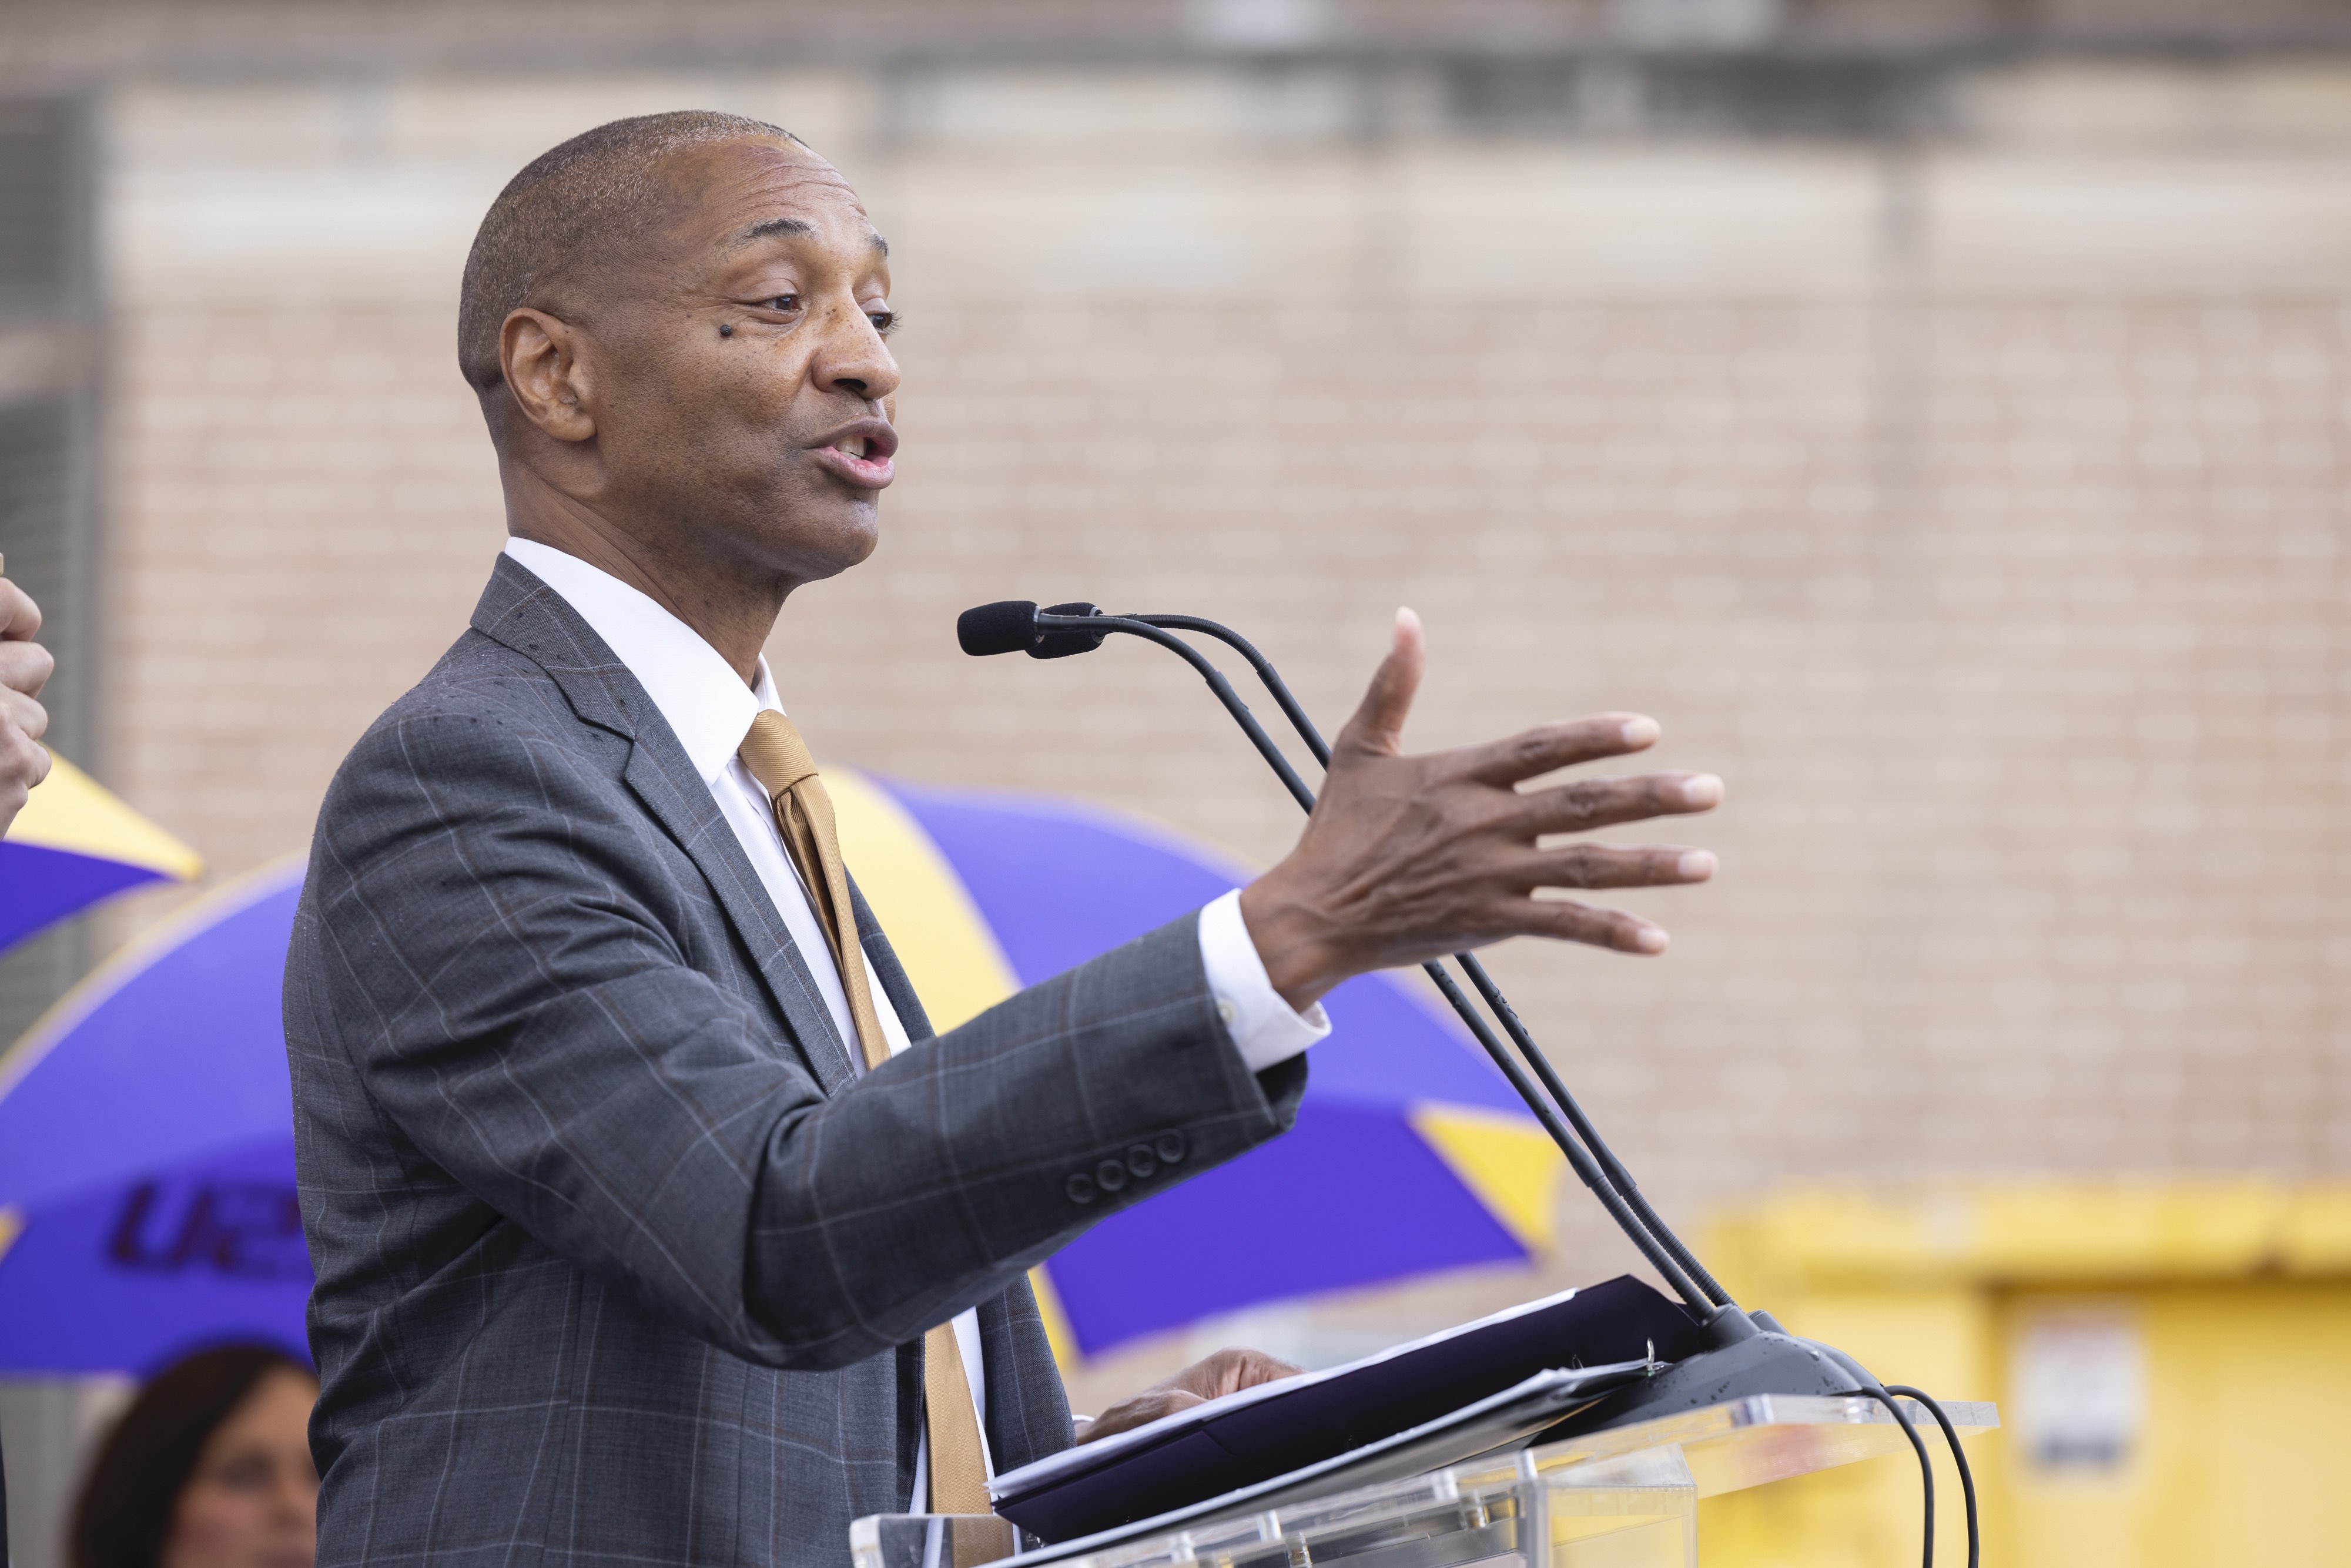 President William F. Tate IV speaks at science builidng groundbreaking ceremony